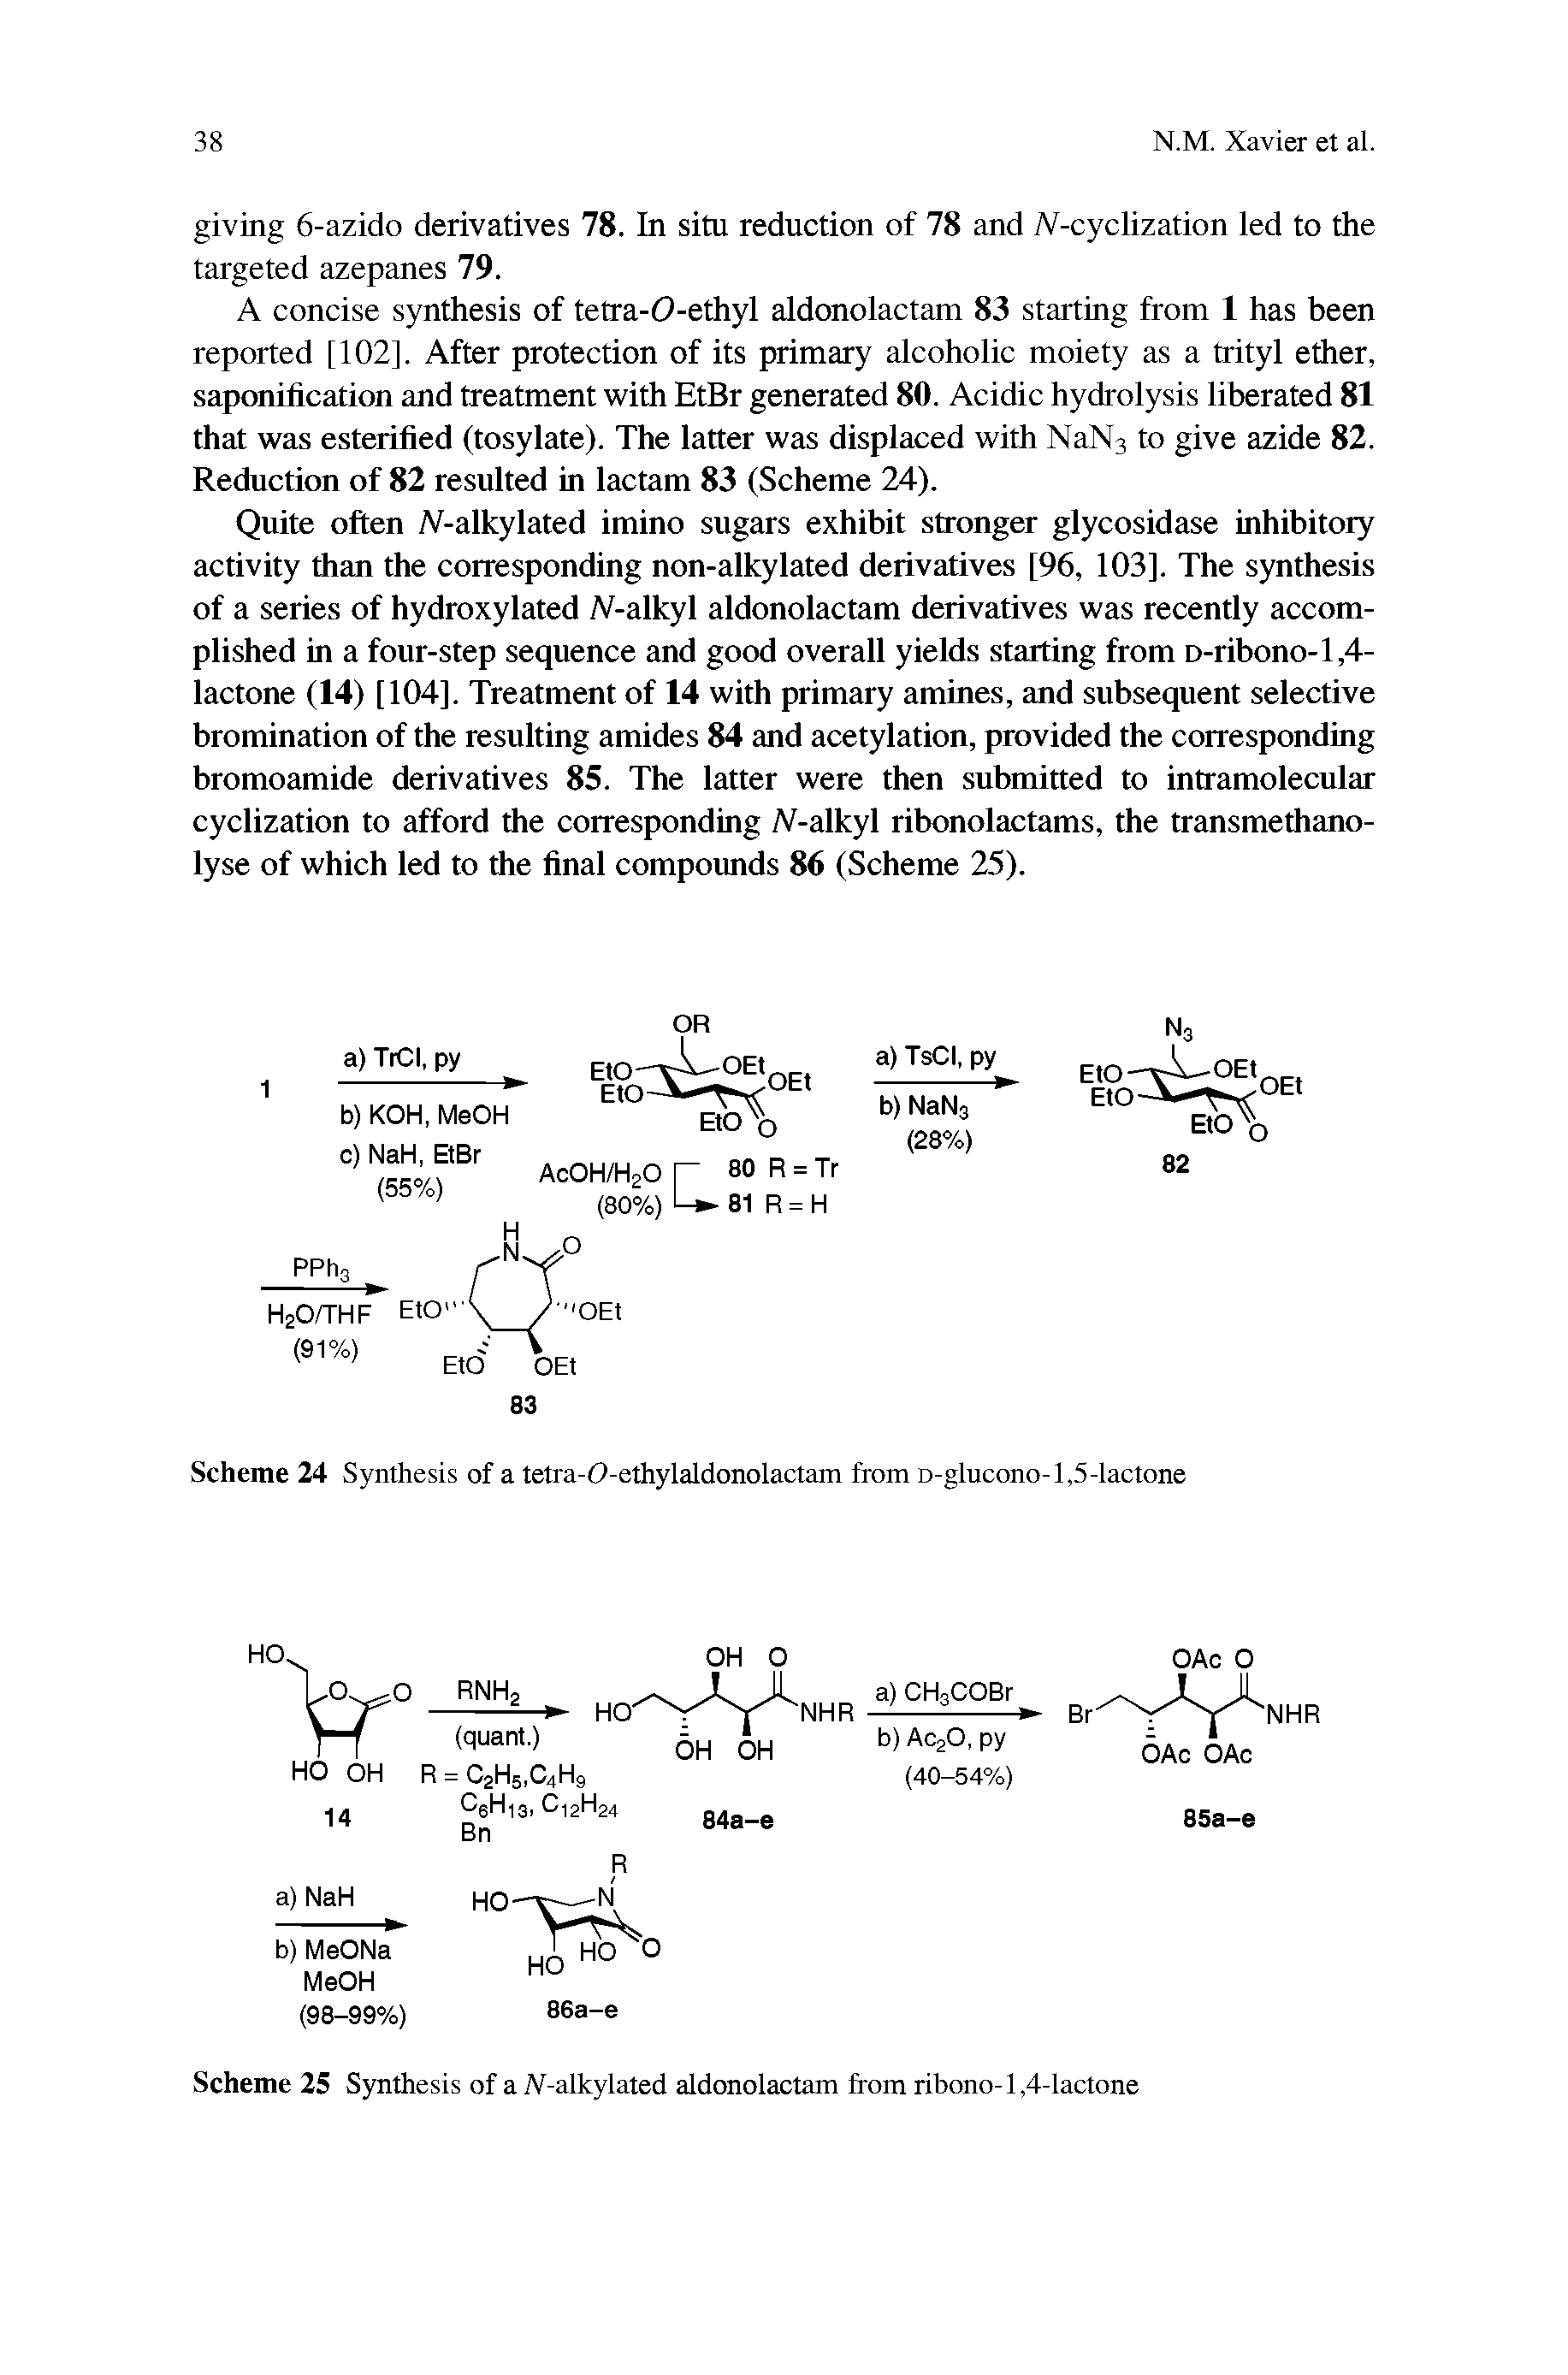 Scheme 25 Synthesis of a A-alkylated aldonolactam from ribono-1,4-lactone...